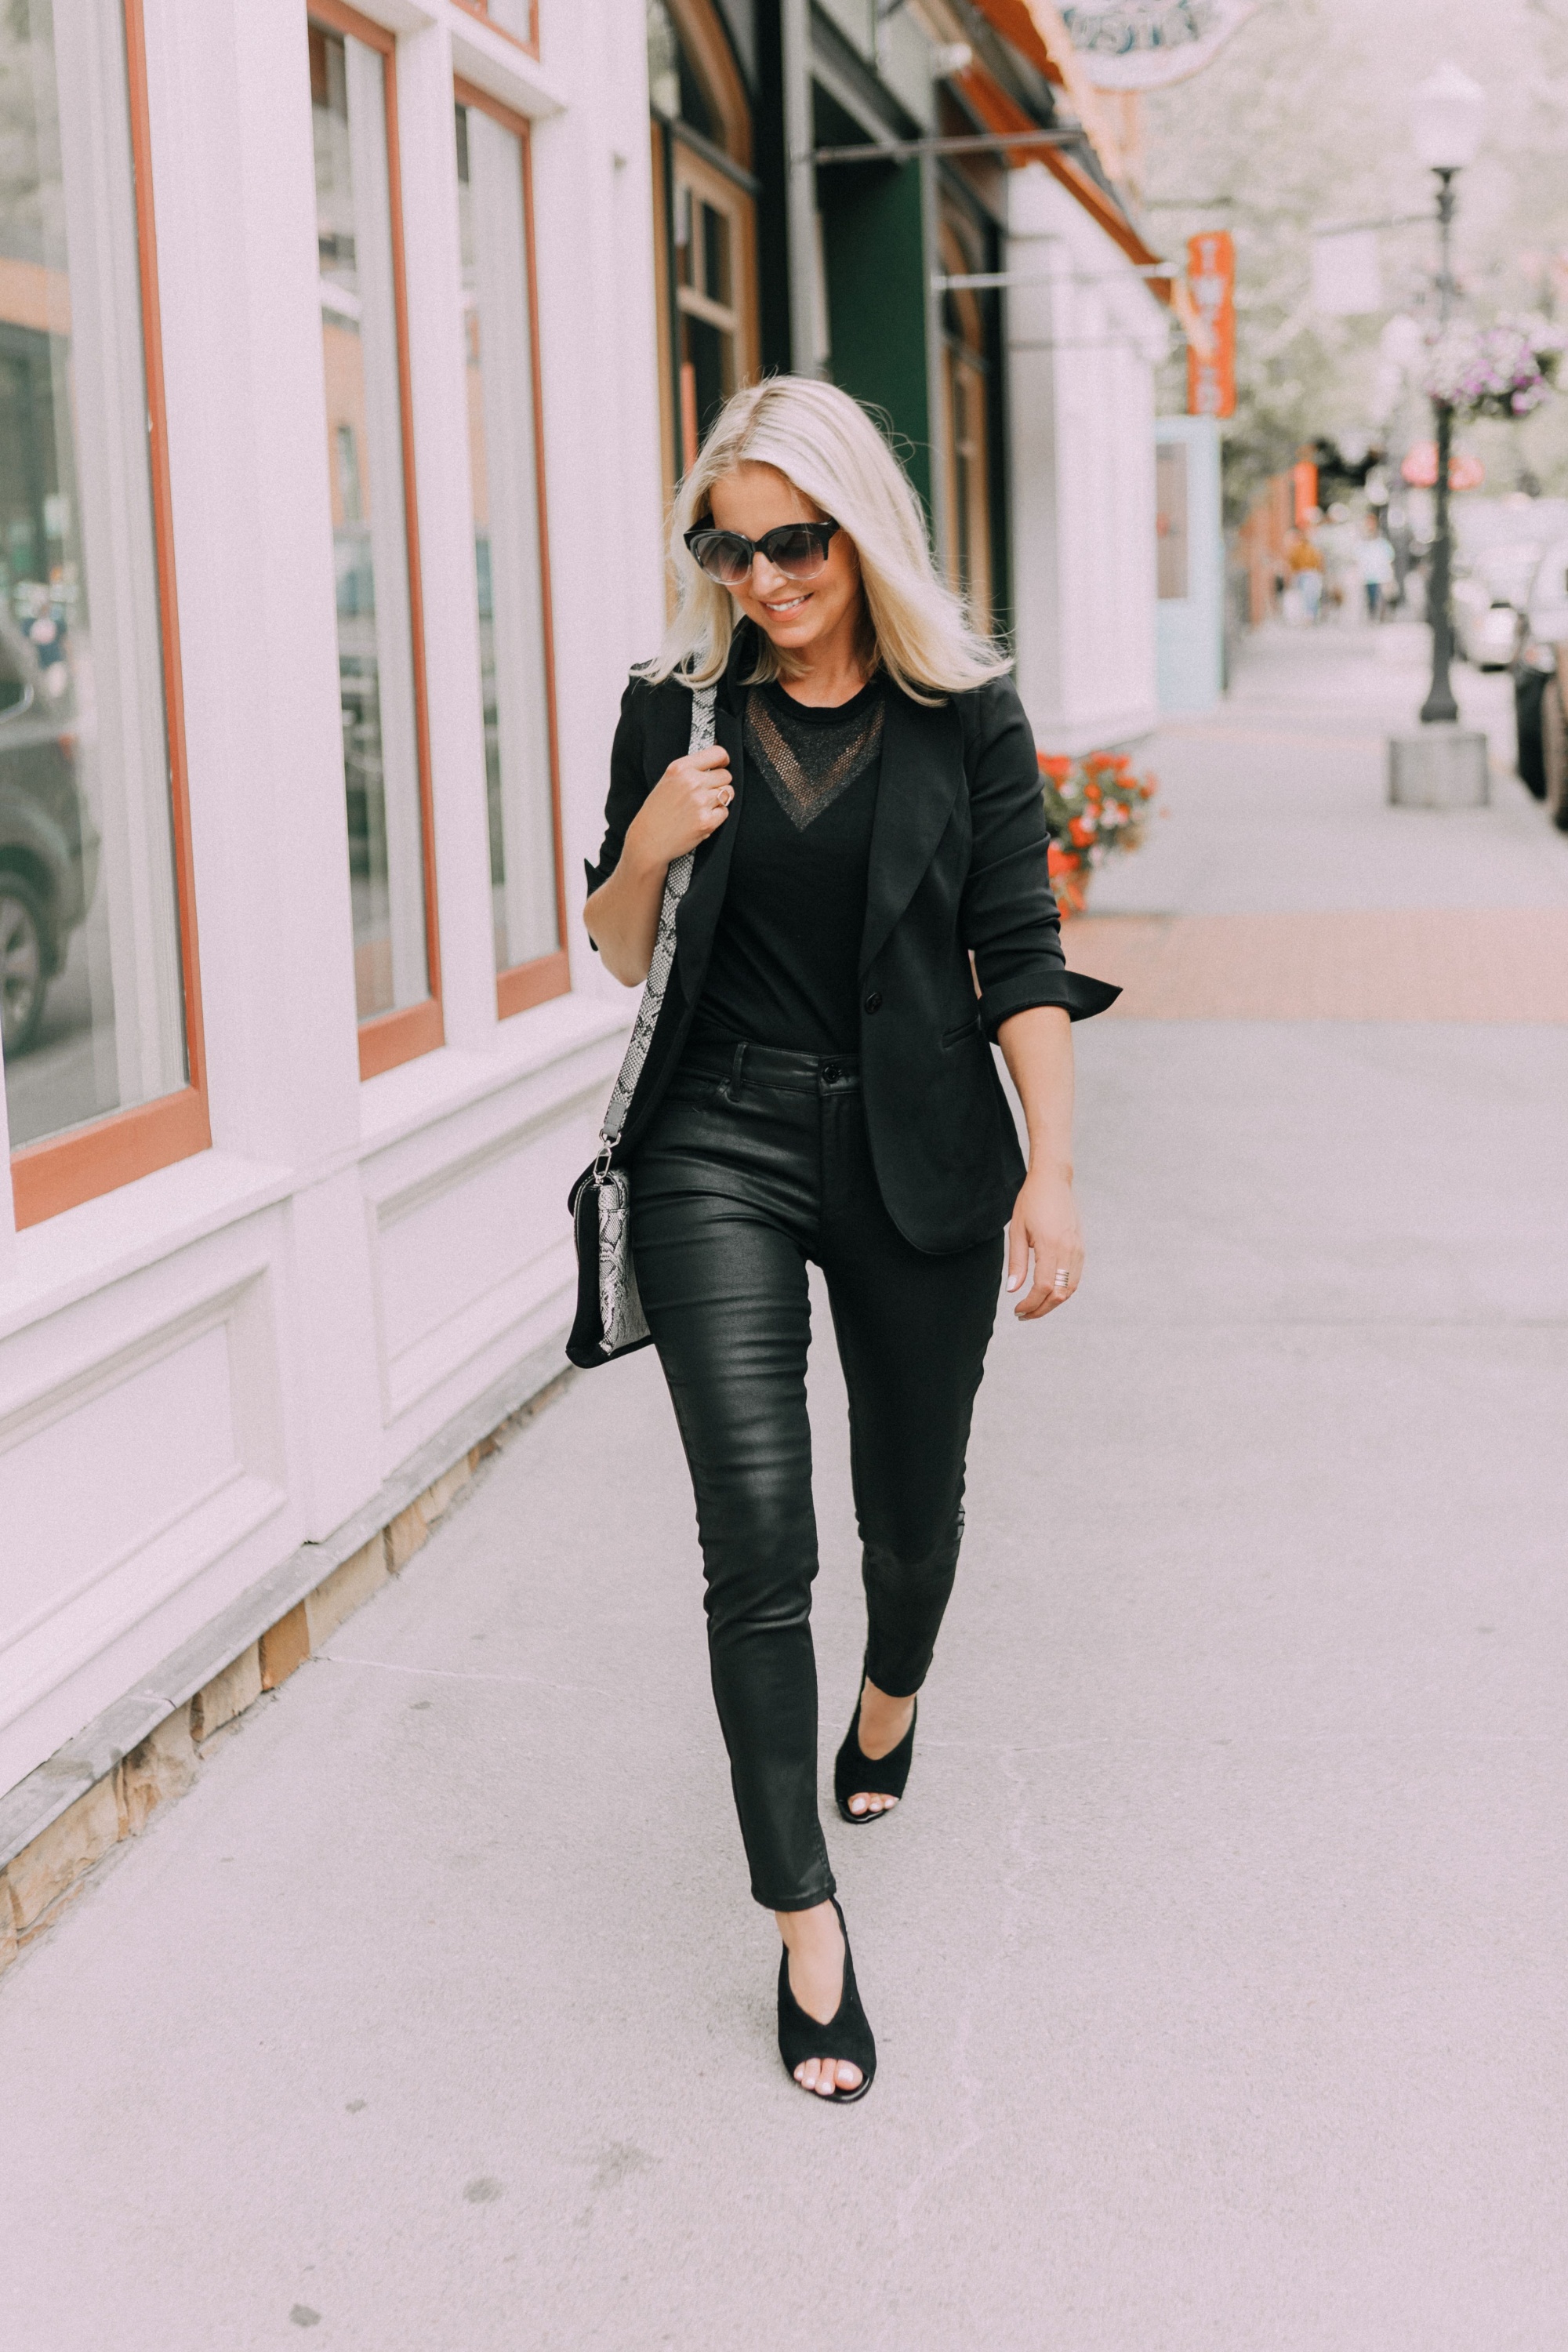 Coated Jeans in petite sizes, Fashion blogger Erin Busbee of BusbeeStyle.com wearing a head to toe all-black look by White House Black Market including coated jeans, python accented bag and heels, sleeveless sweater, and black blazer in Telluride, CO, sharing monochromatic outfits